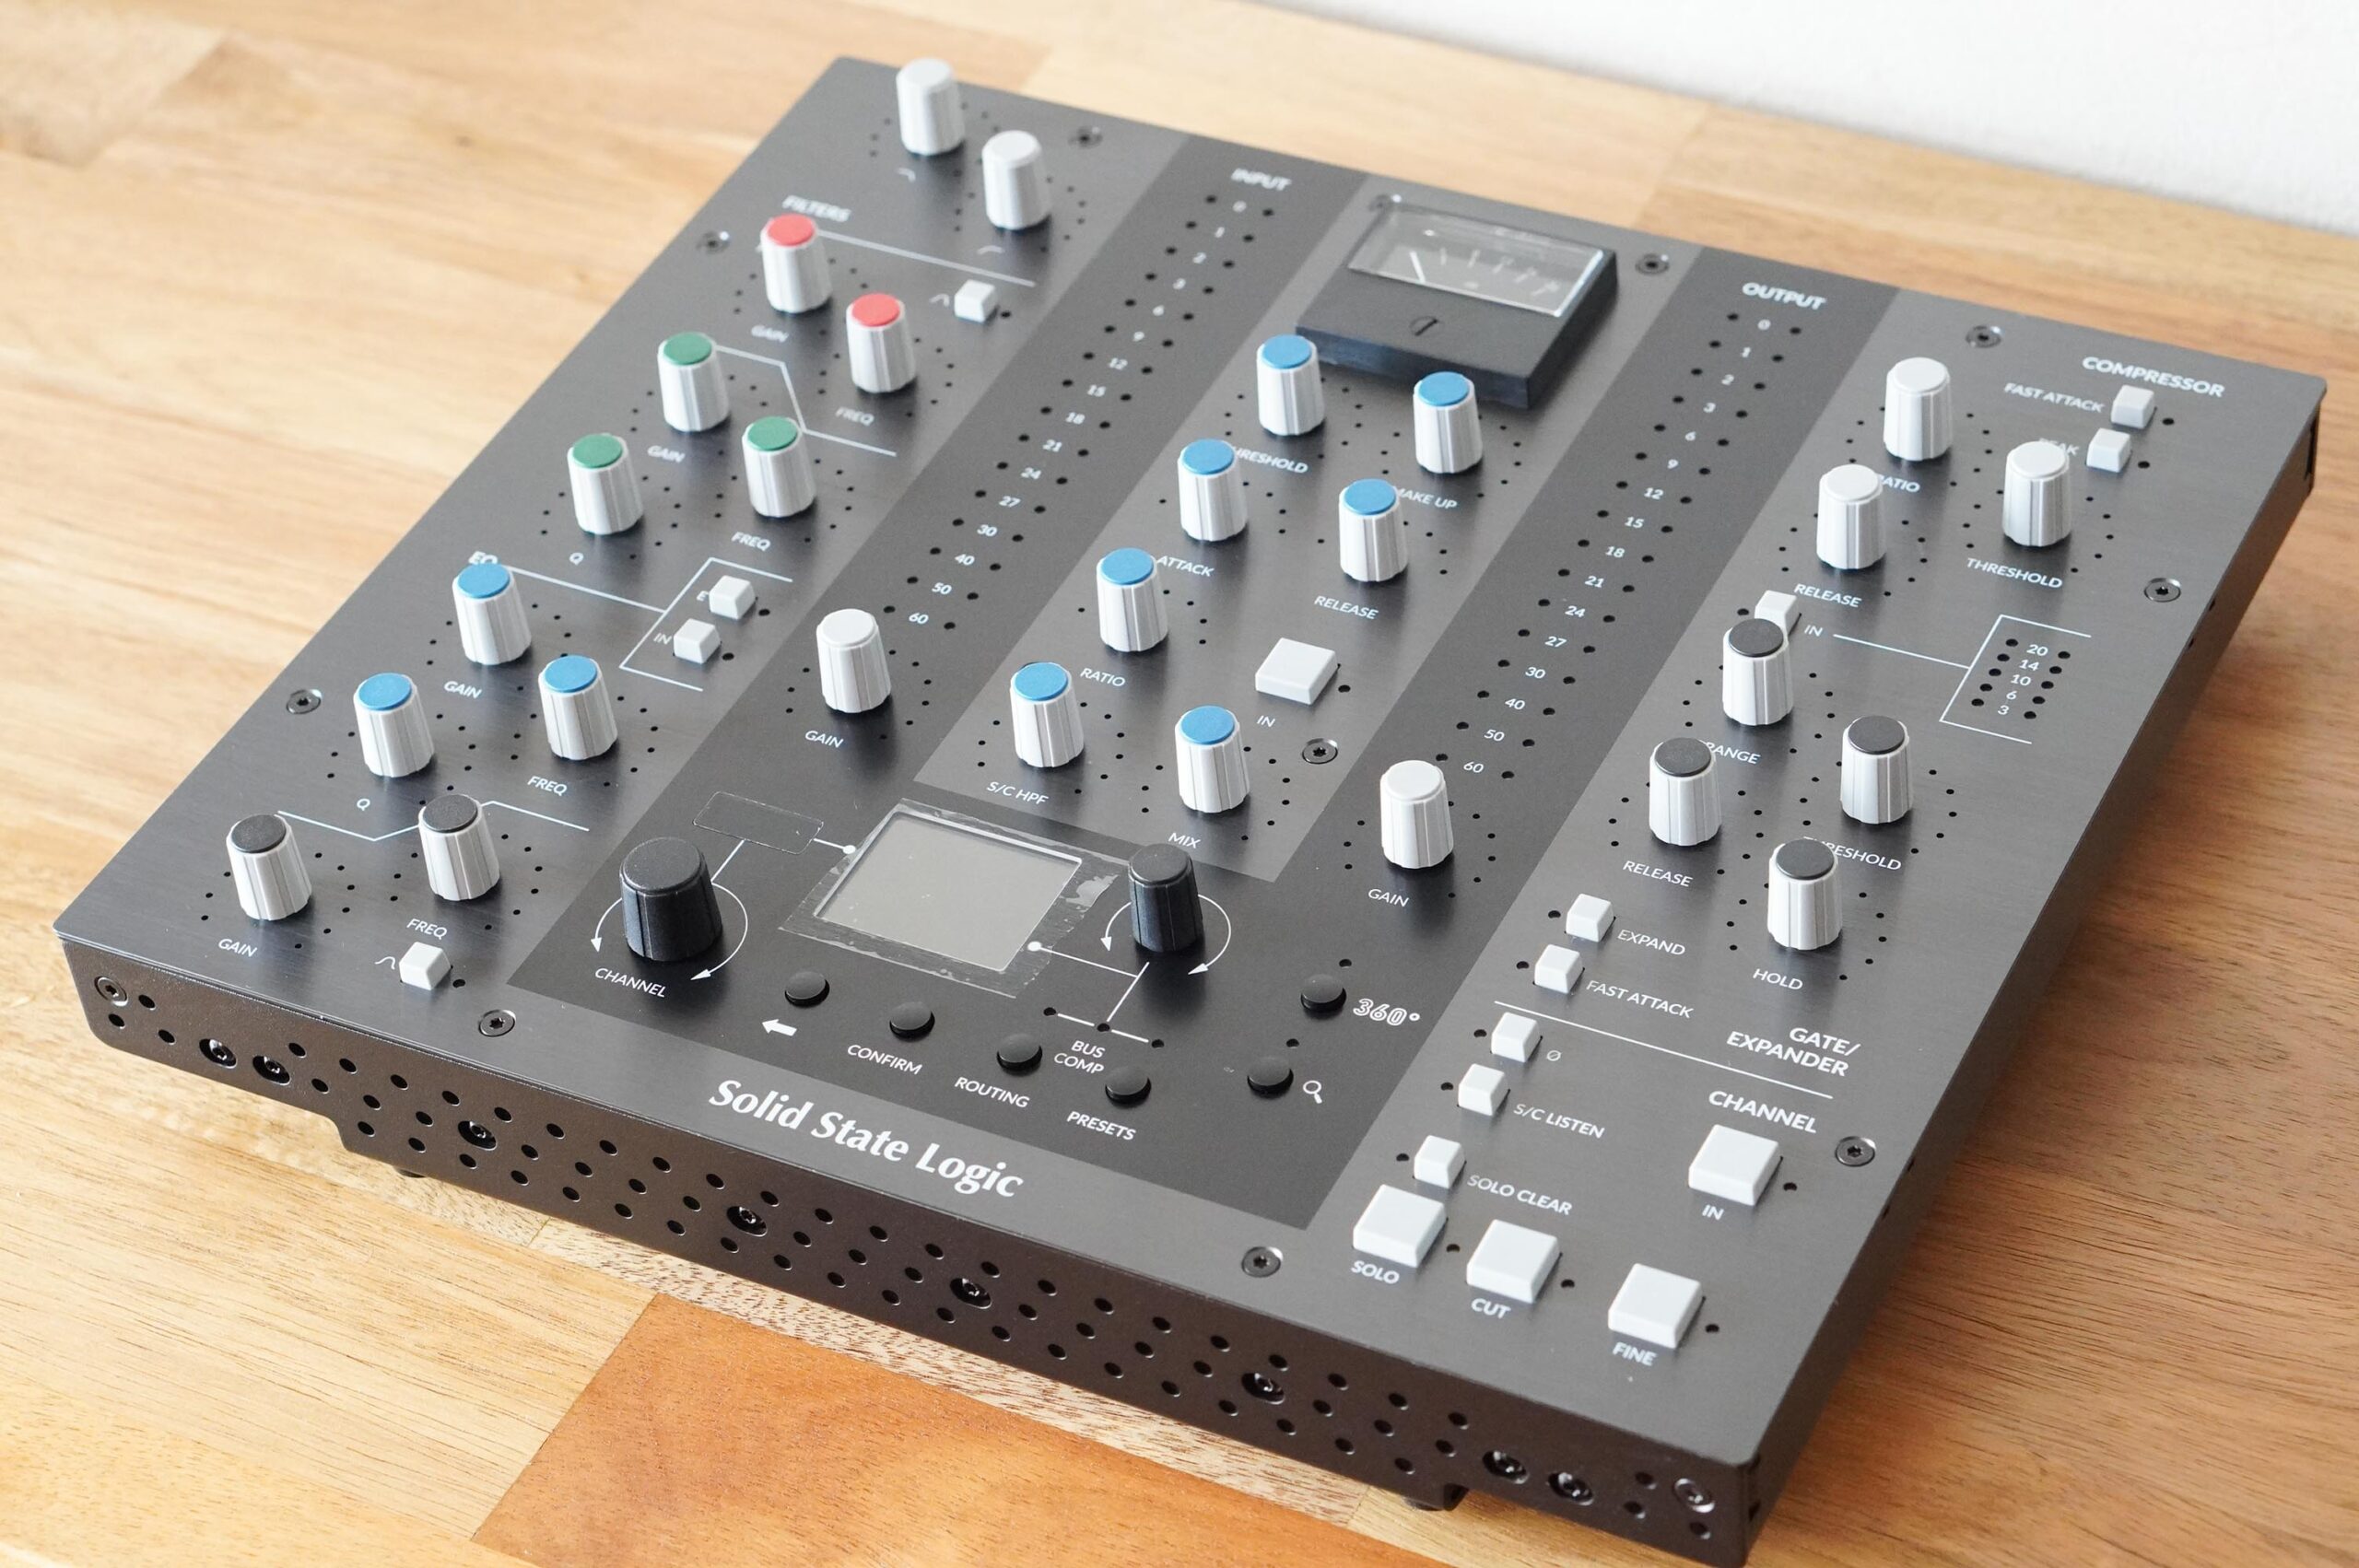 ssl-uc1-physical-midi-controller-use-review-computer-music-driver